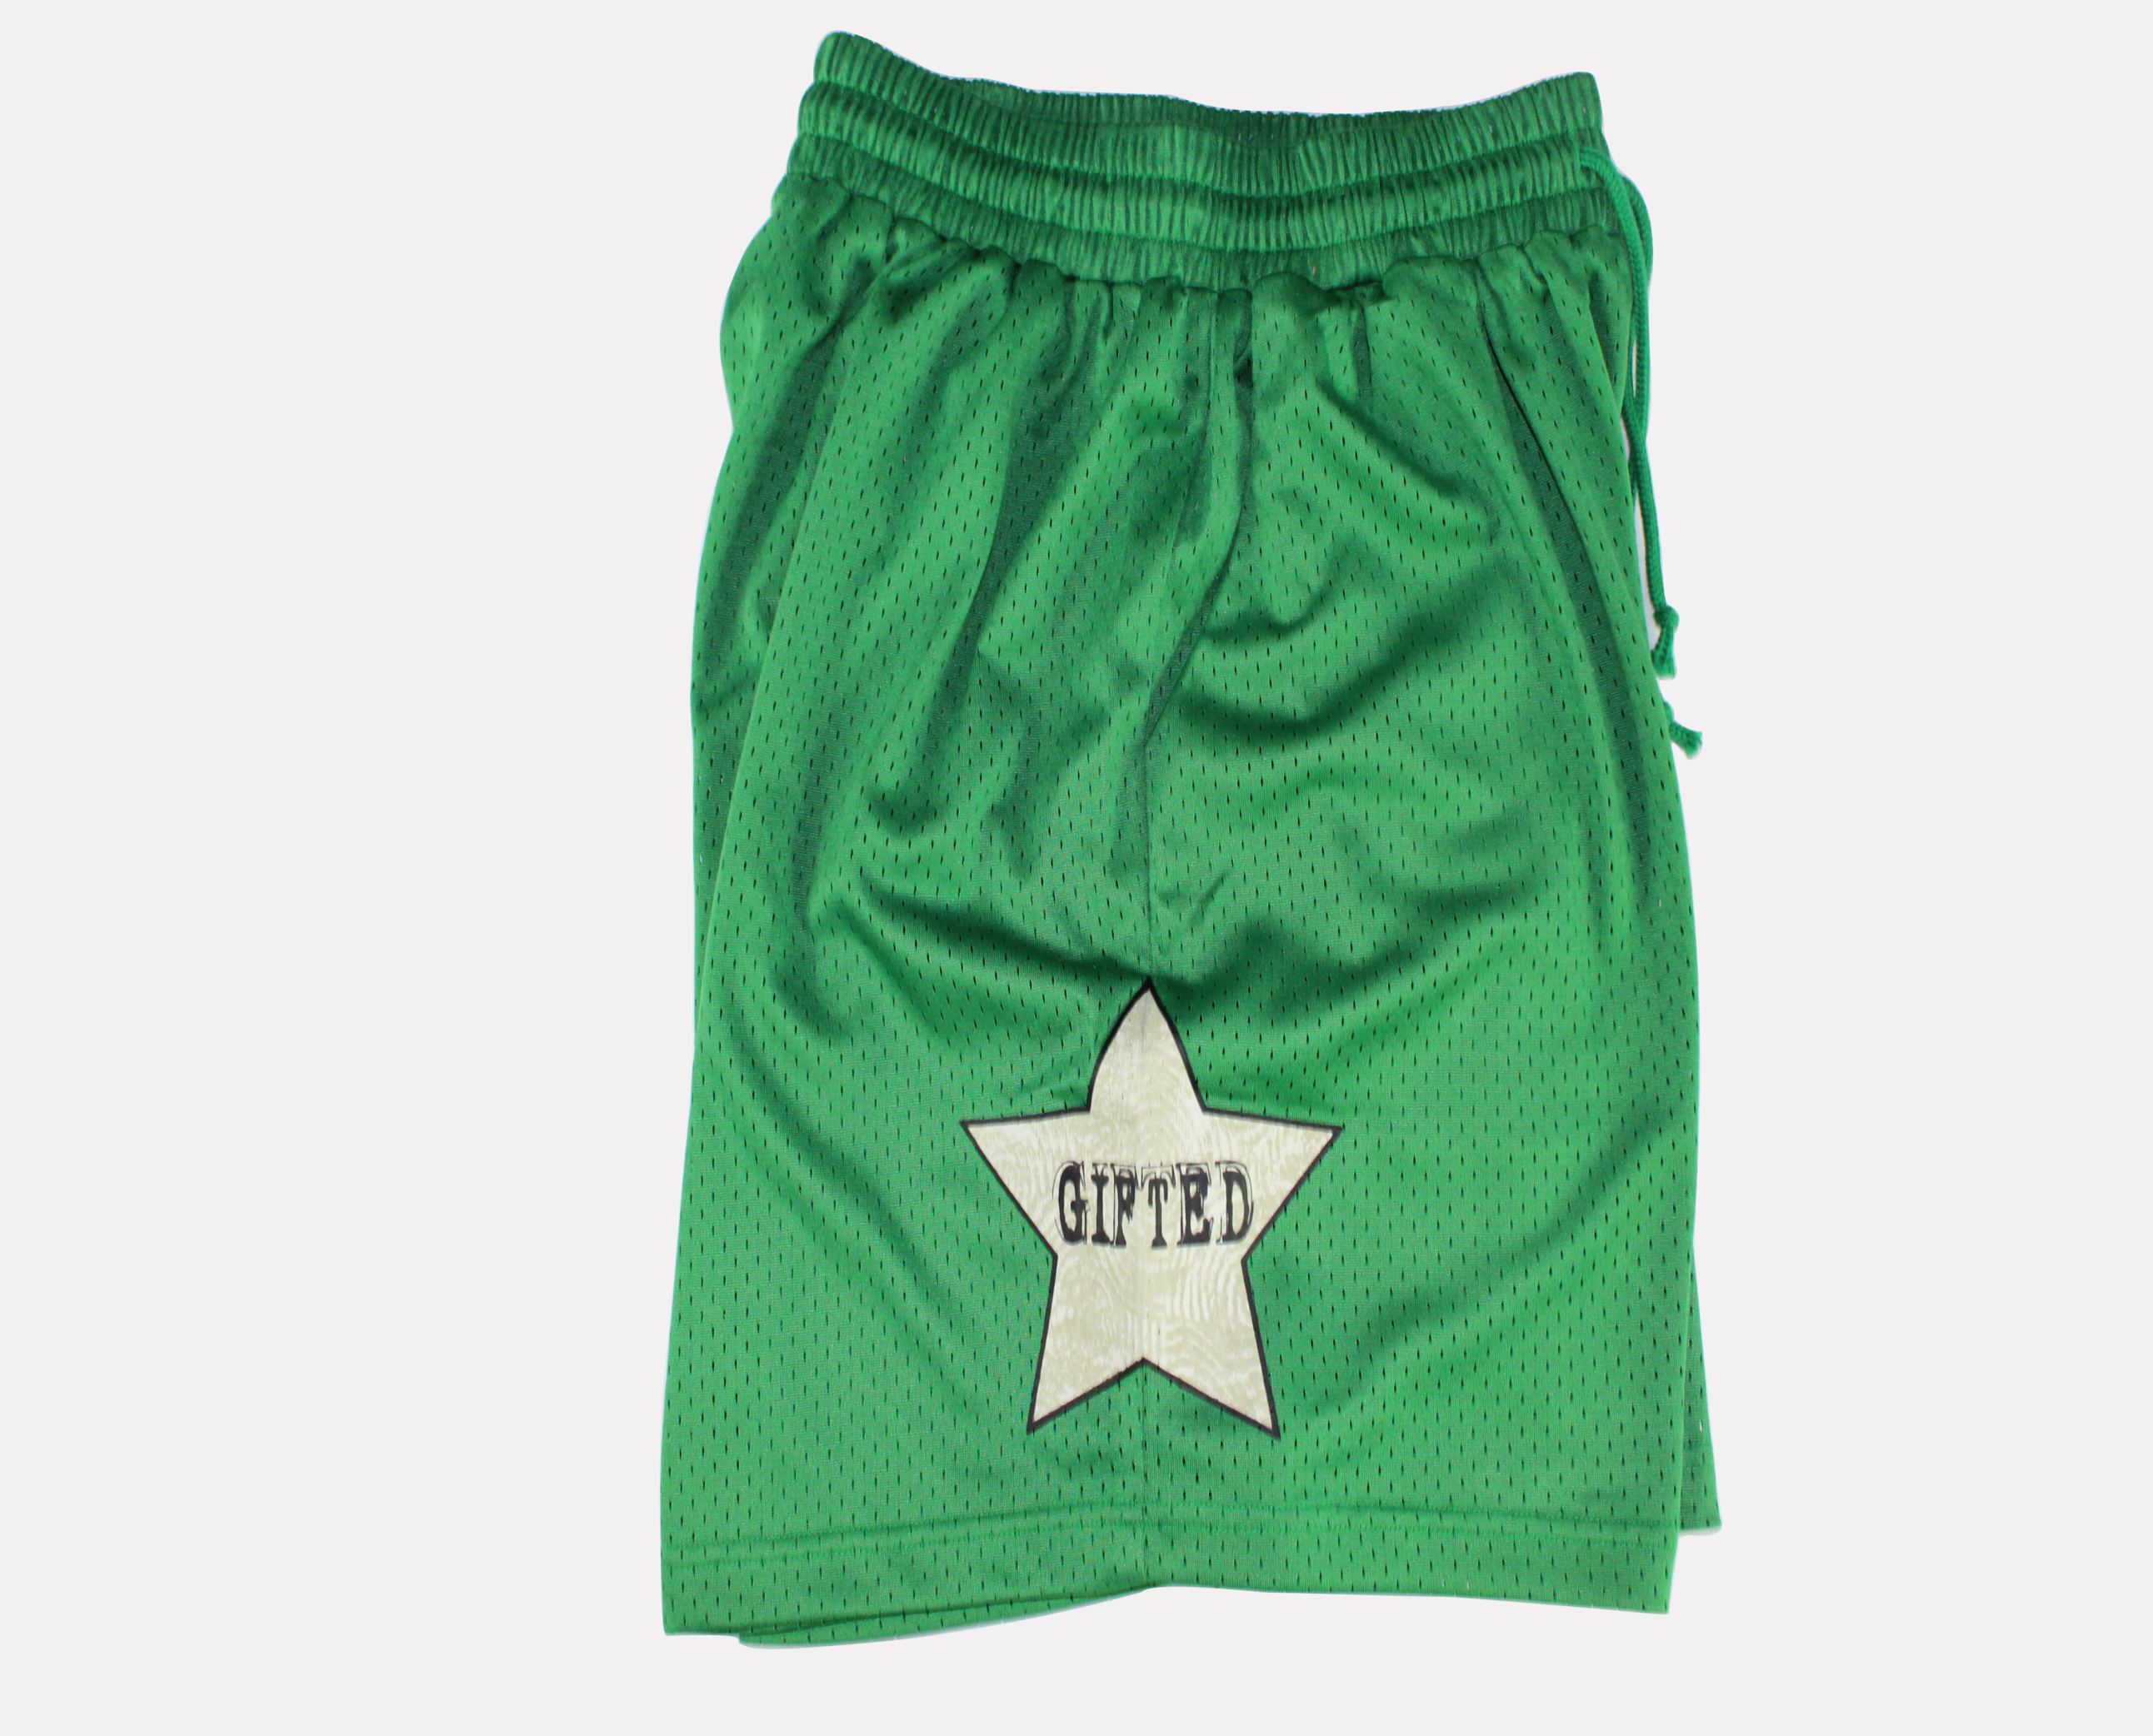 Gifted All Star Shorts (Green)